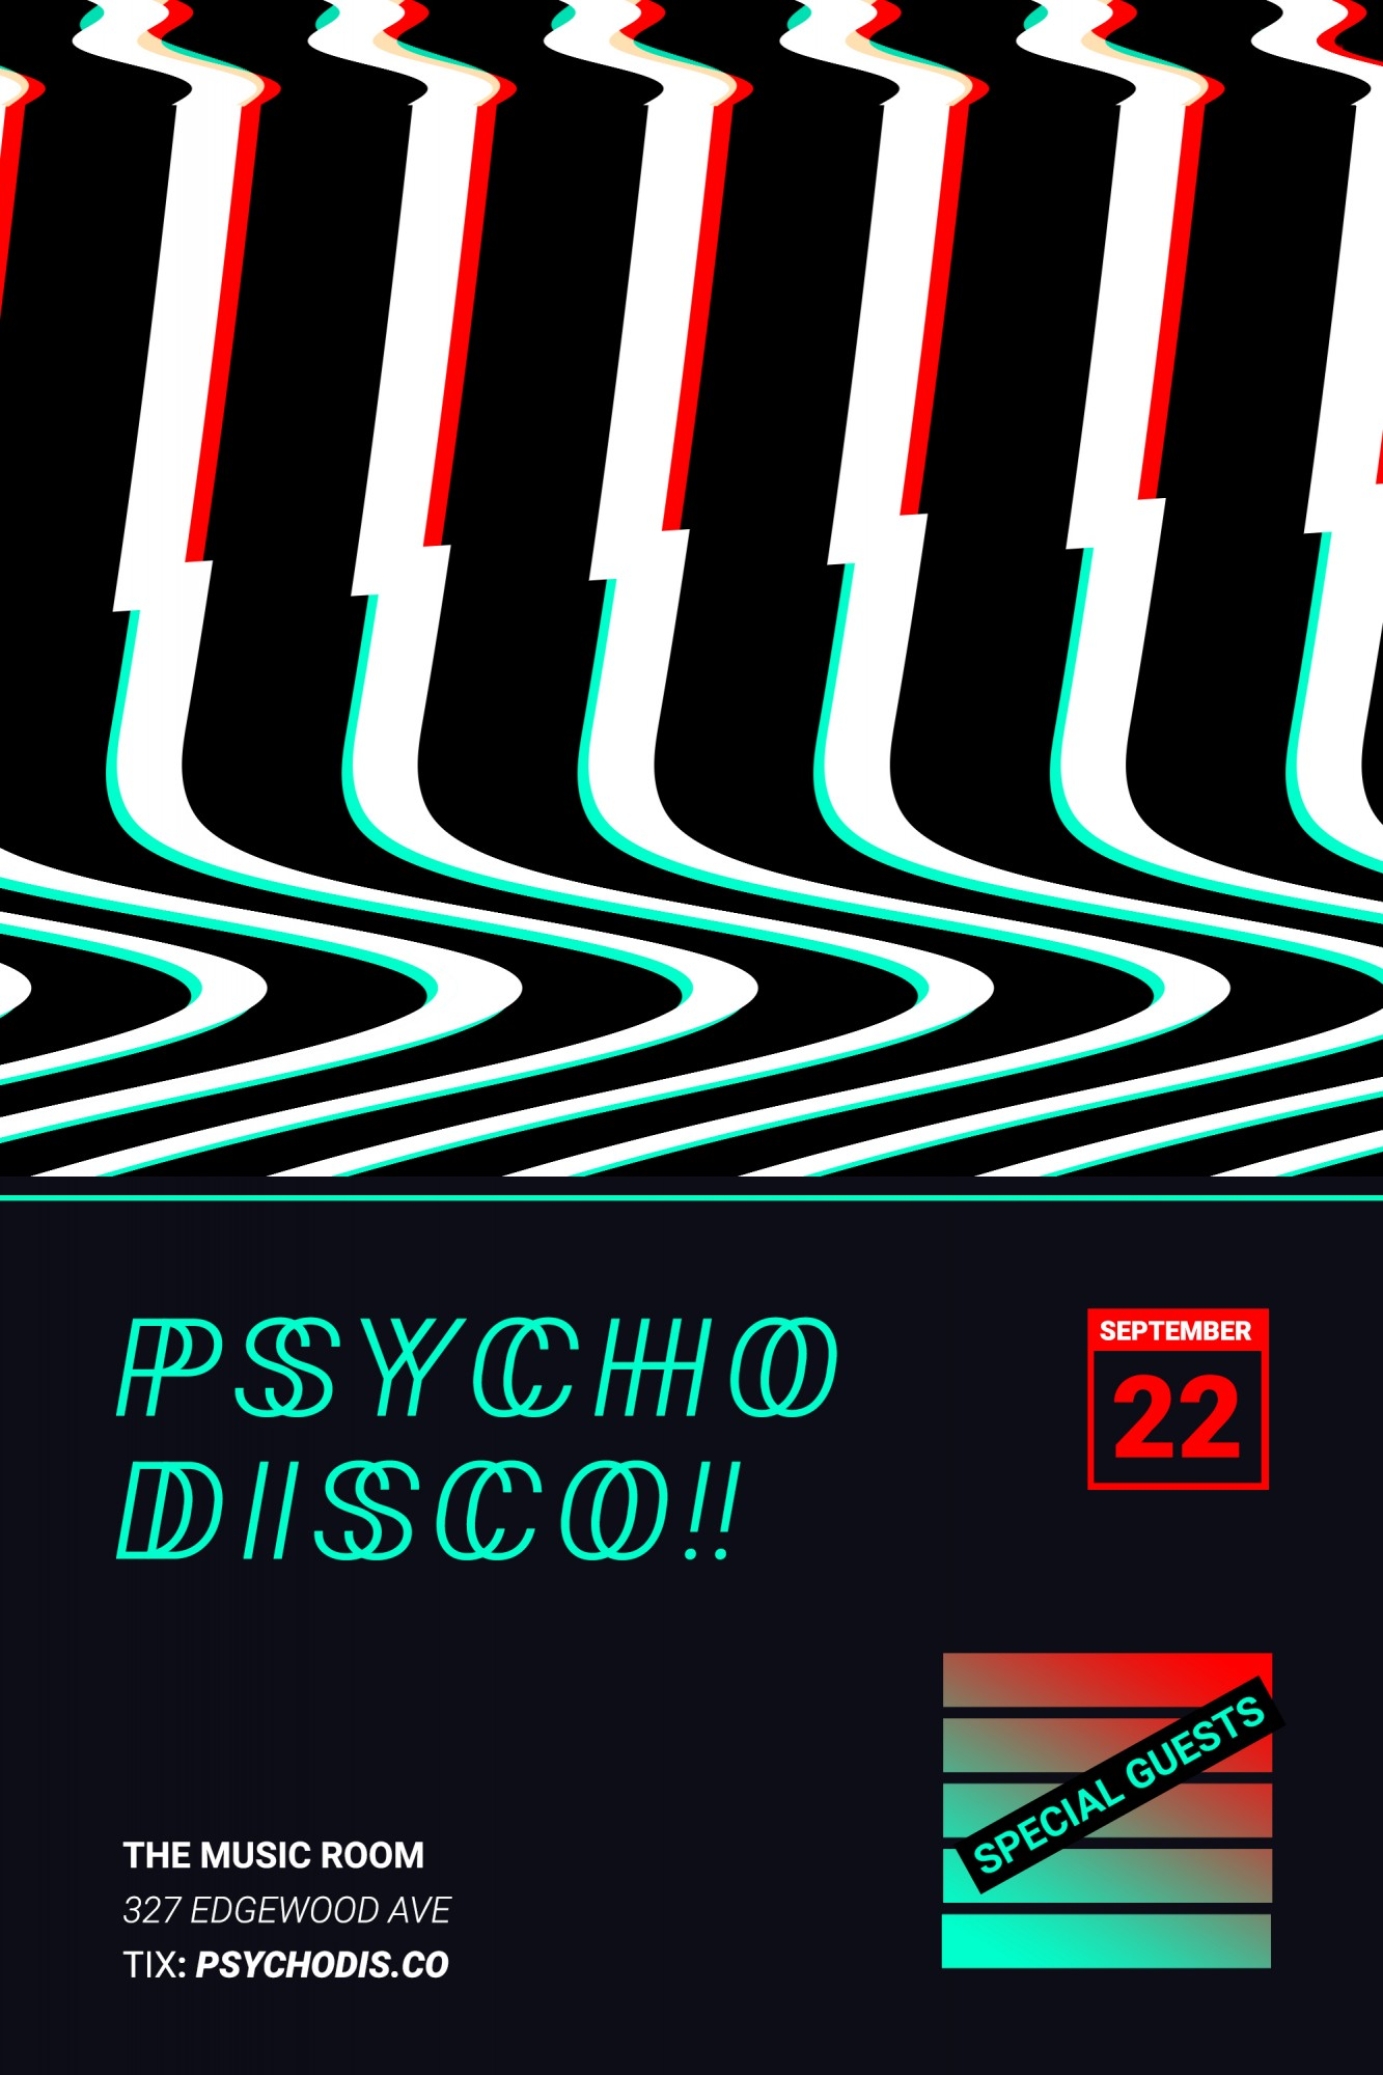 Psycho Disco! Event posters